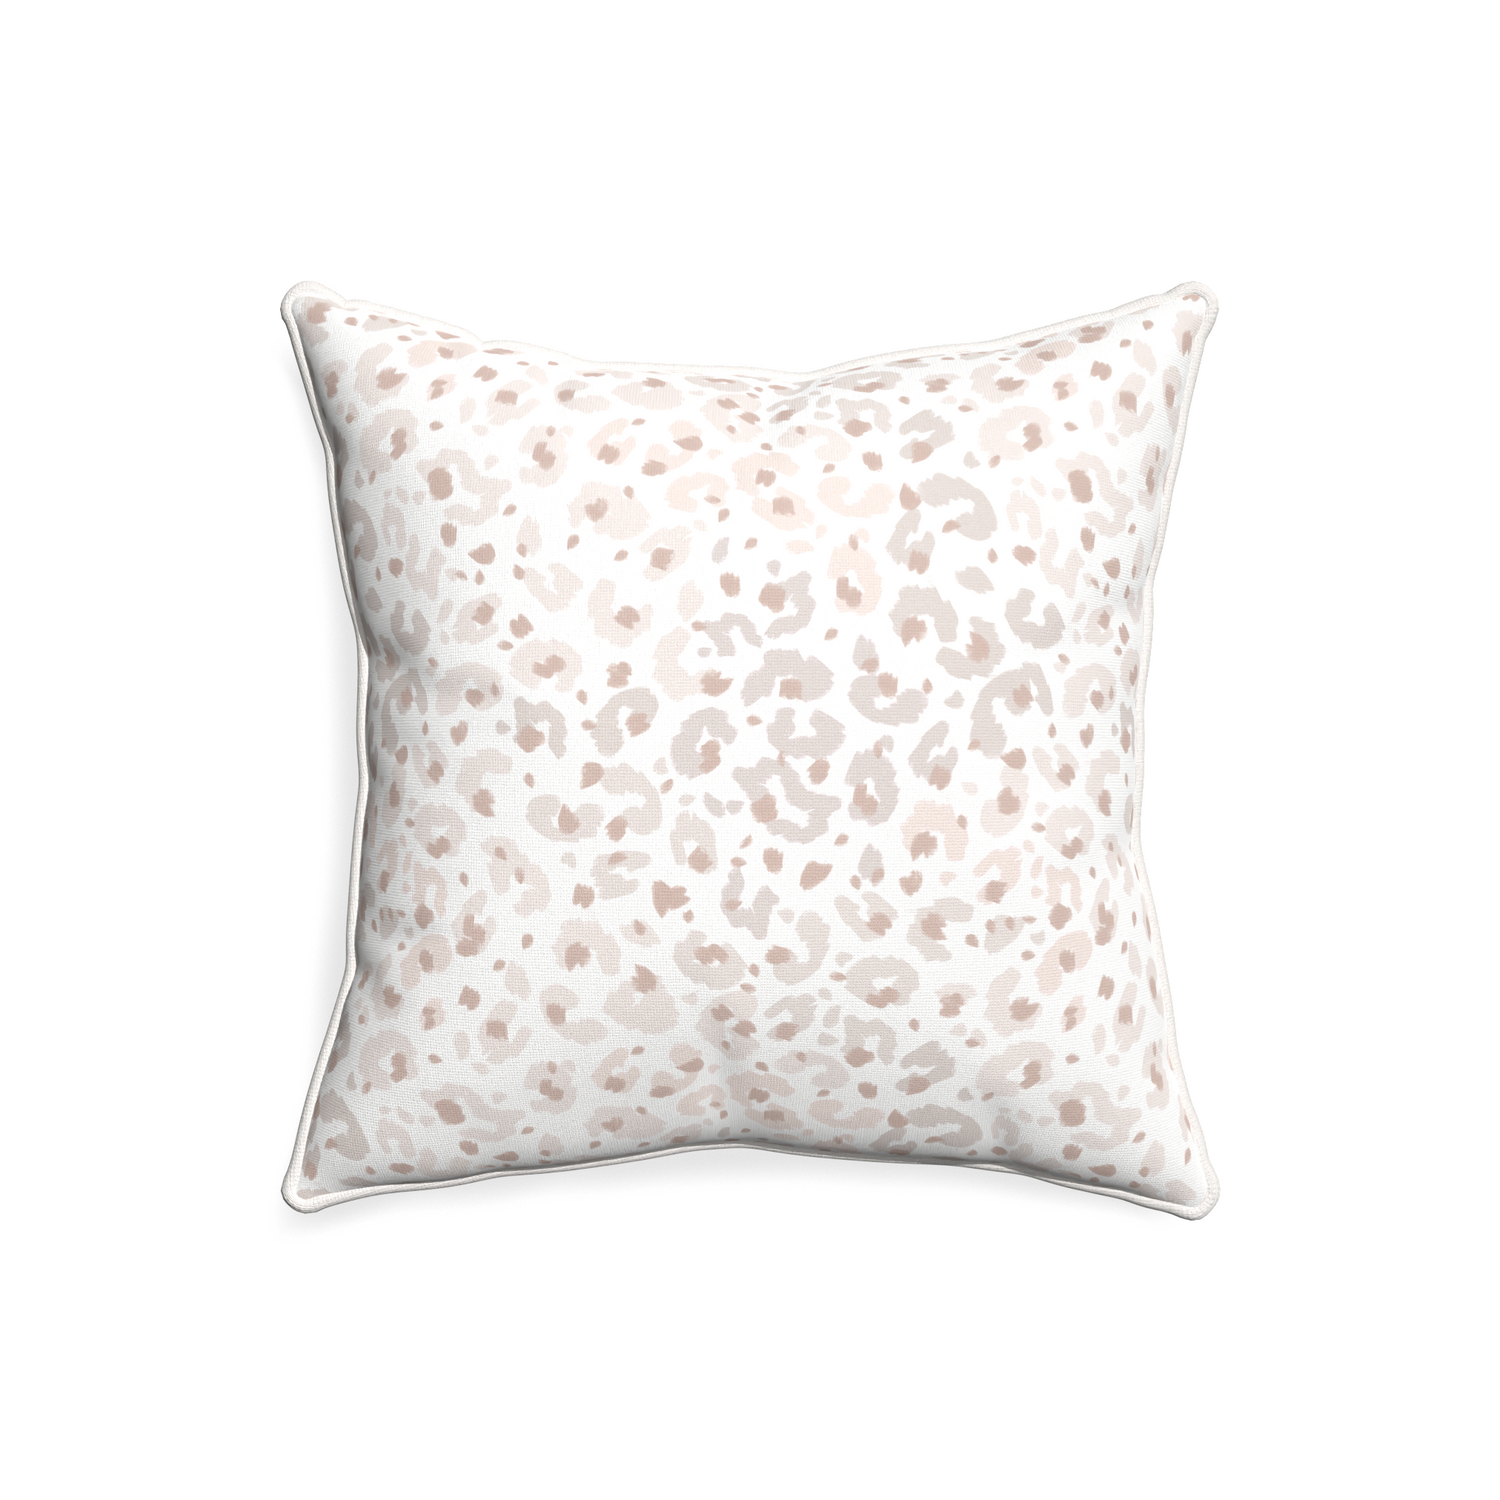 20-square rosie custom pillow with snow piping on white background